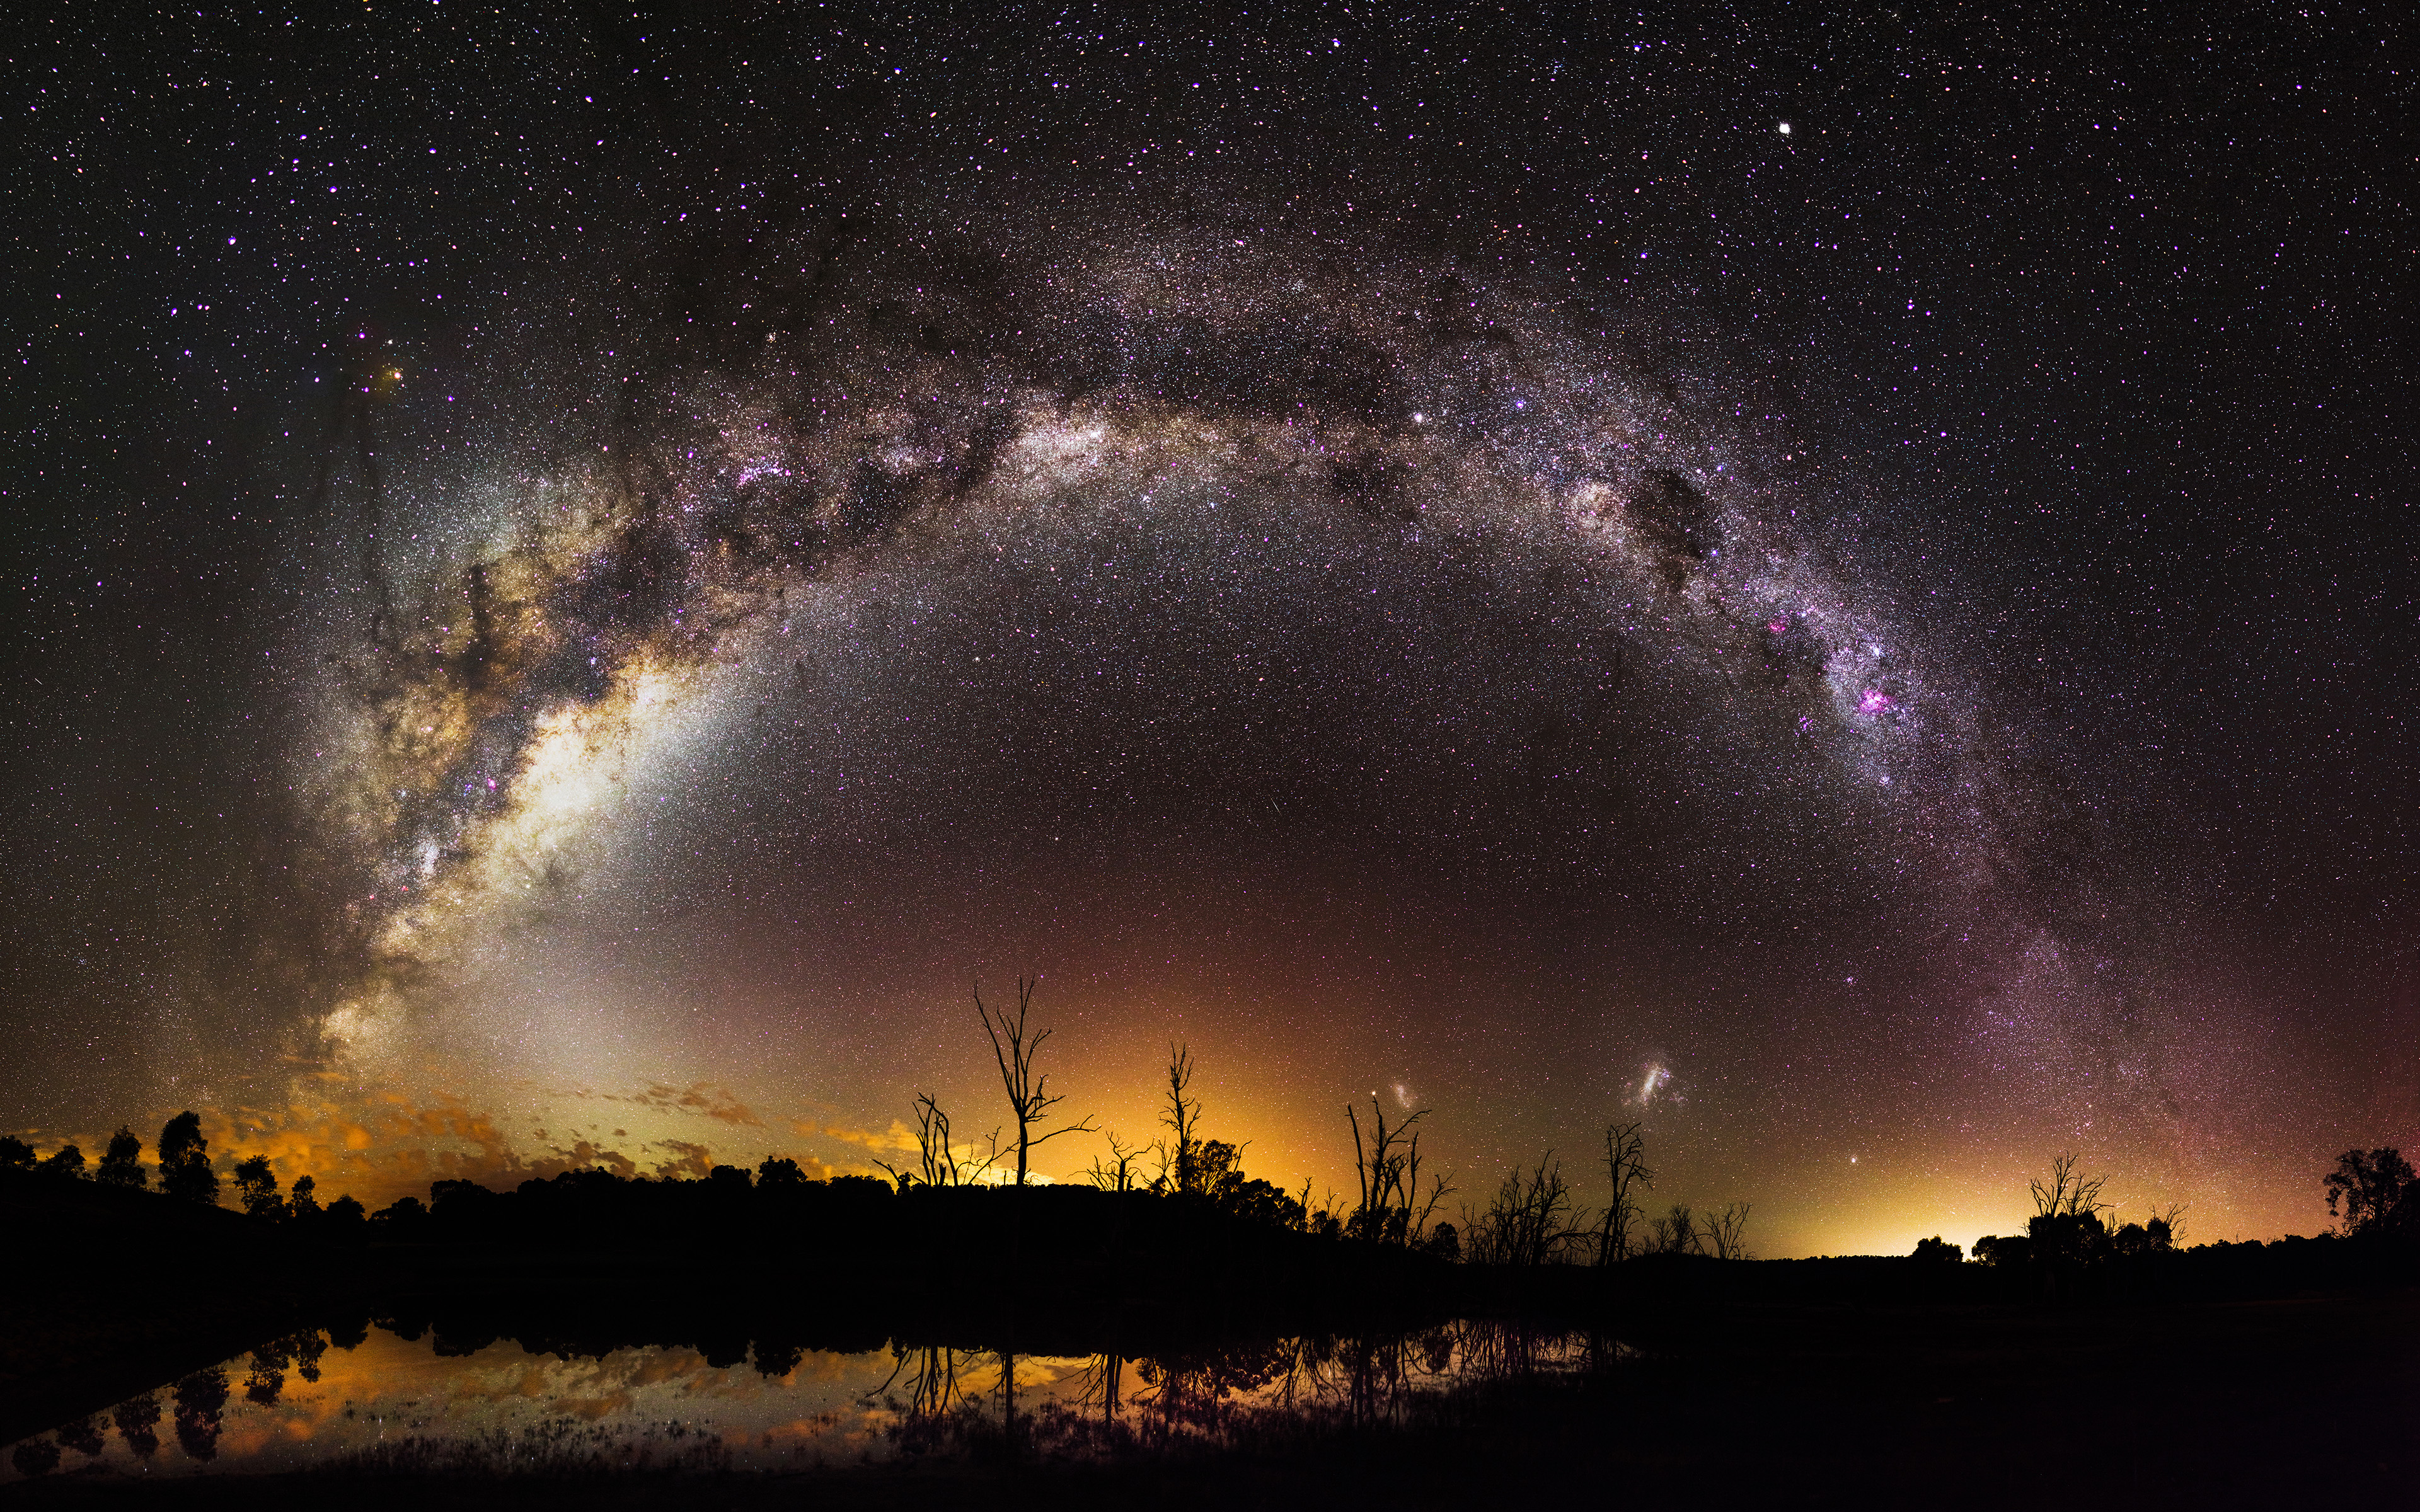 A beautiful landscape with the Milky Way